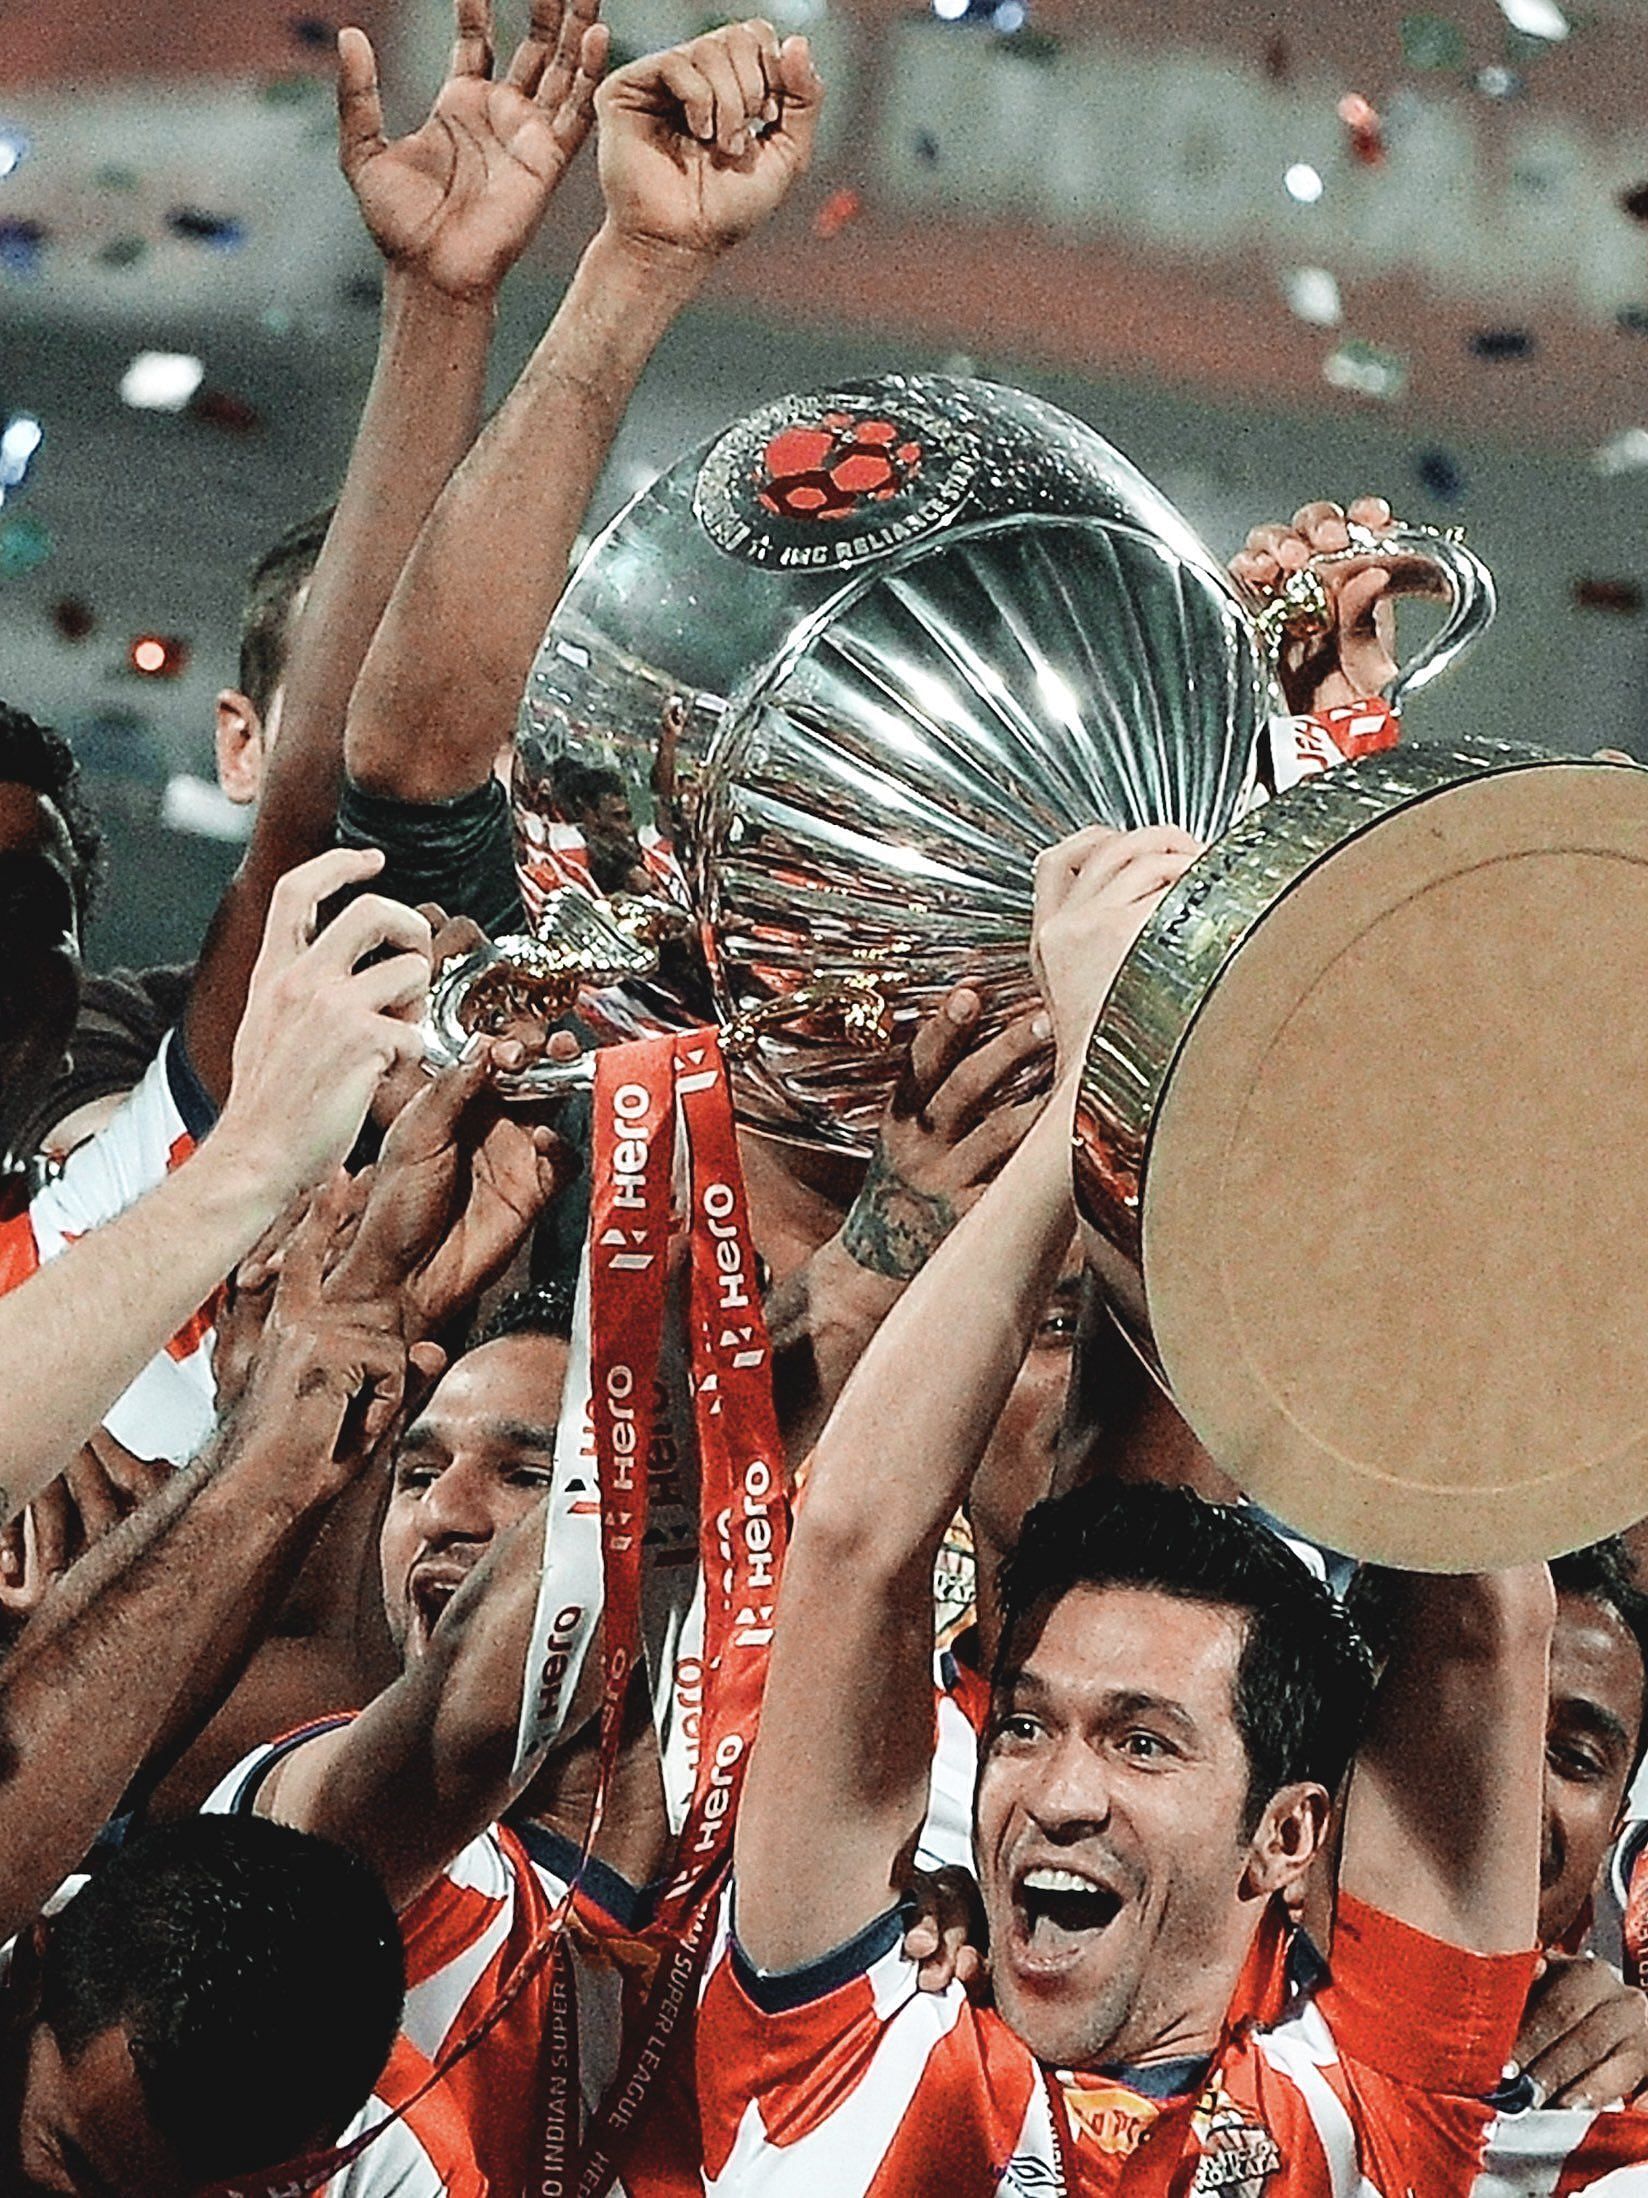 ATK lifted the inaugural ISL title in 2014.